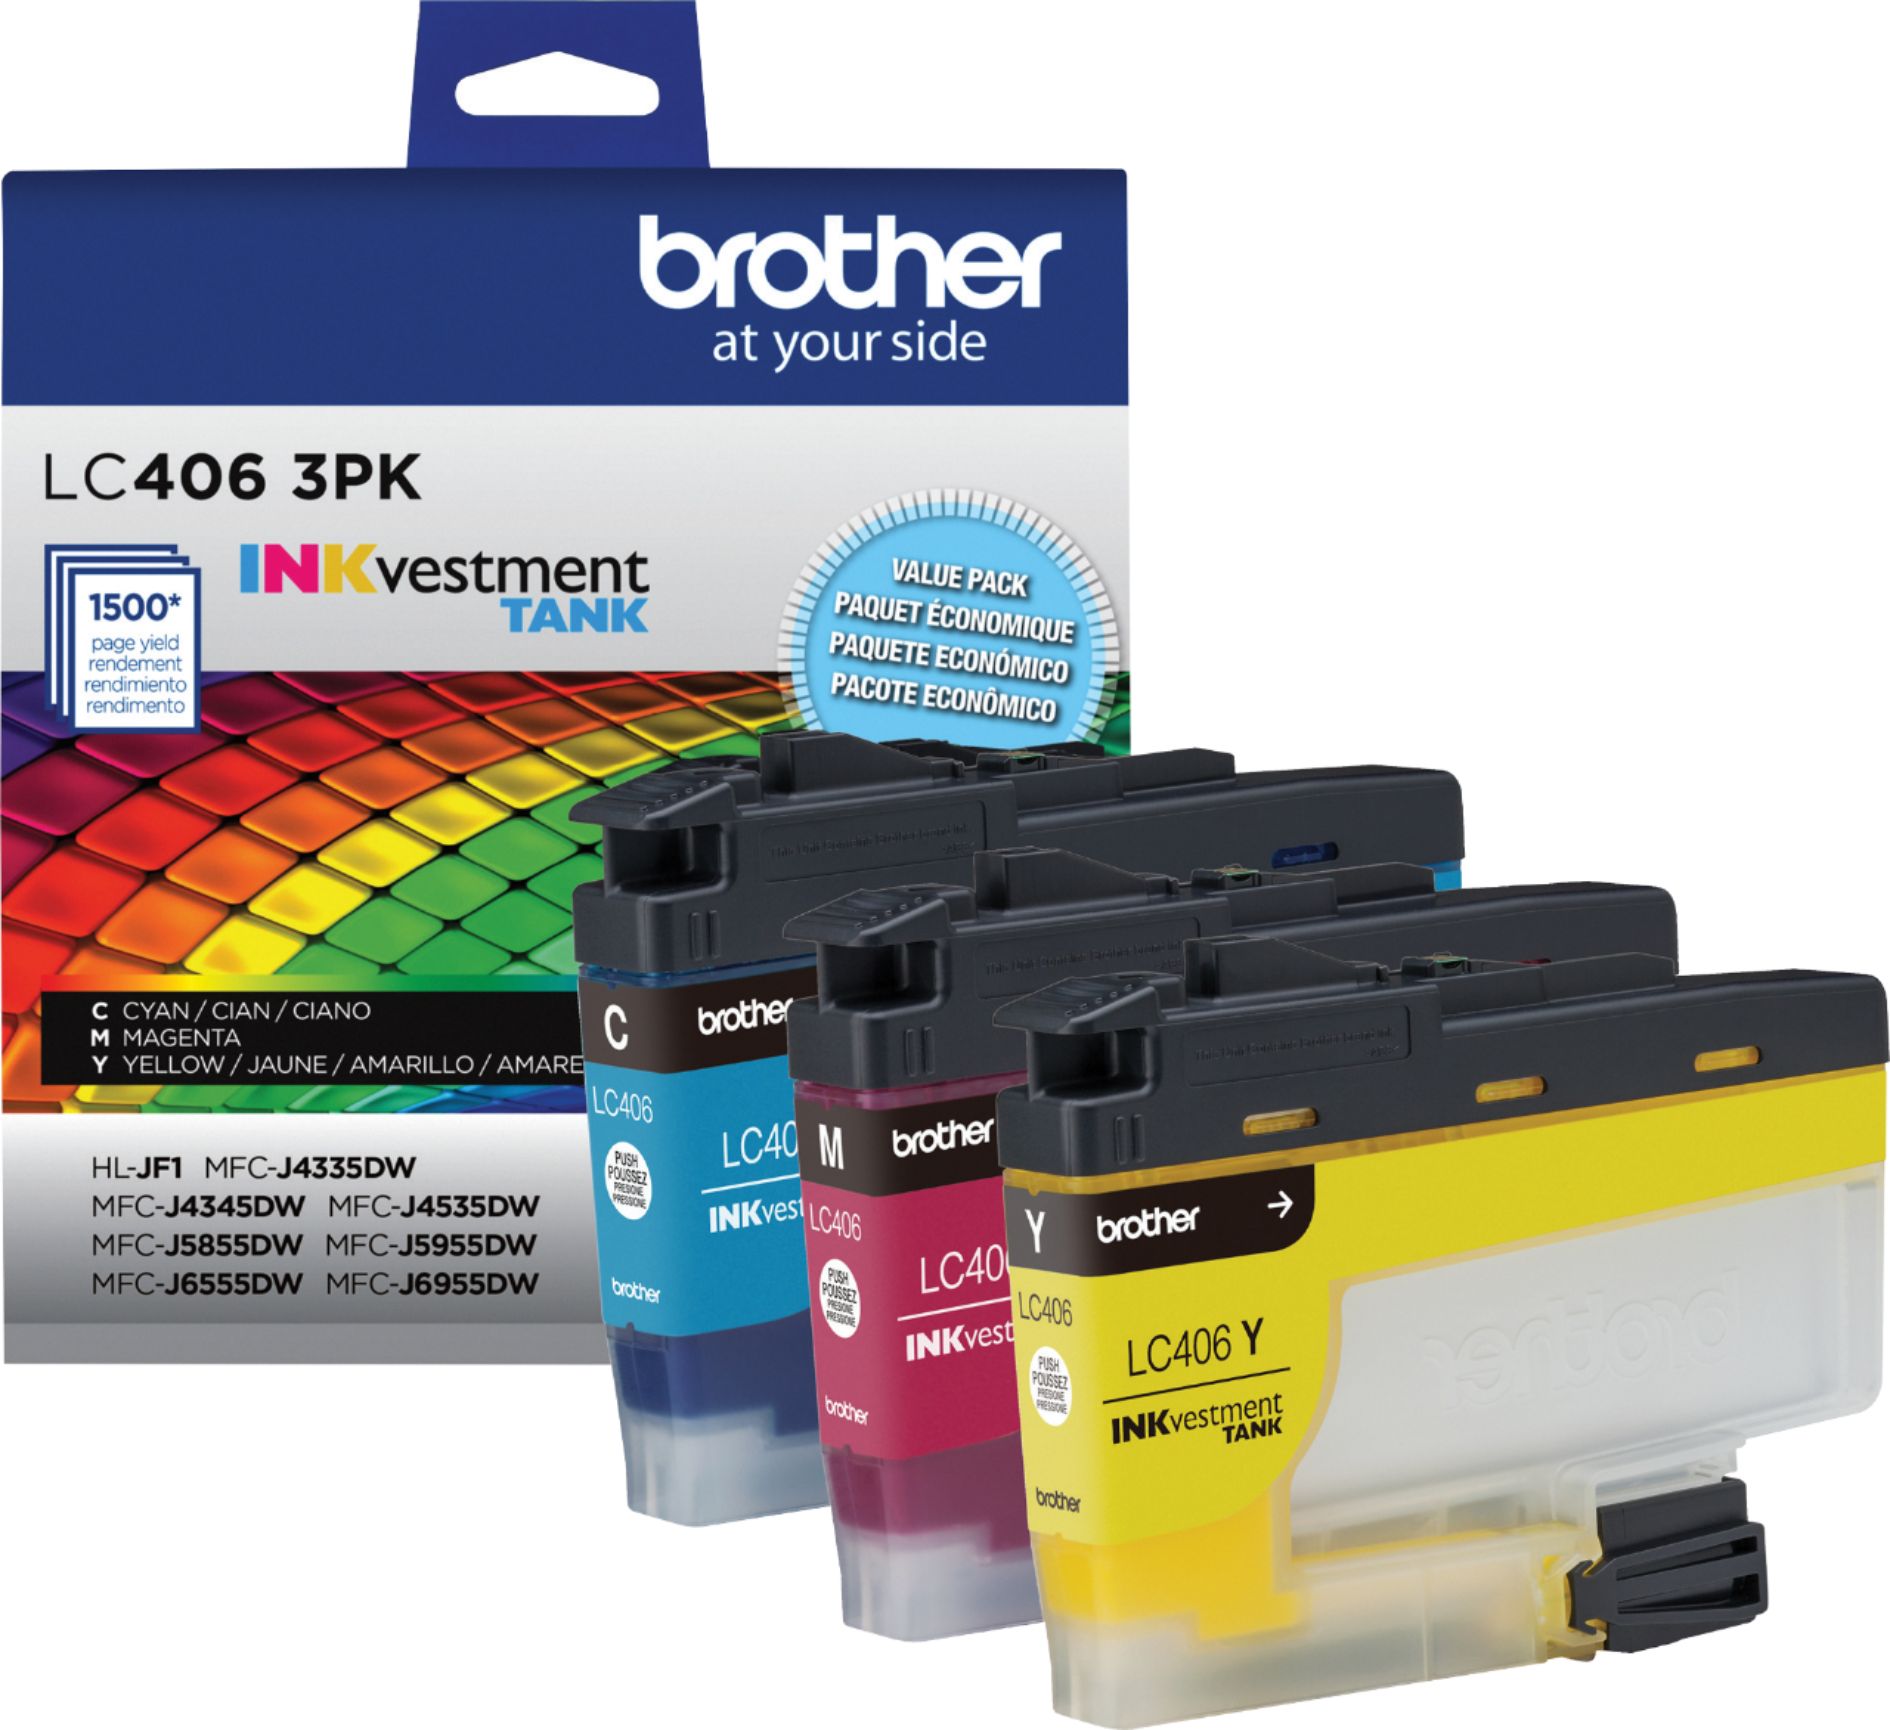 Brother LC406 3PK 3-Pack INKvestment Tank Ink Cartridges Cyan 